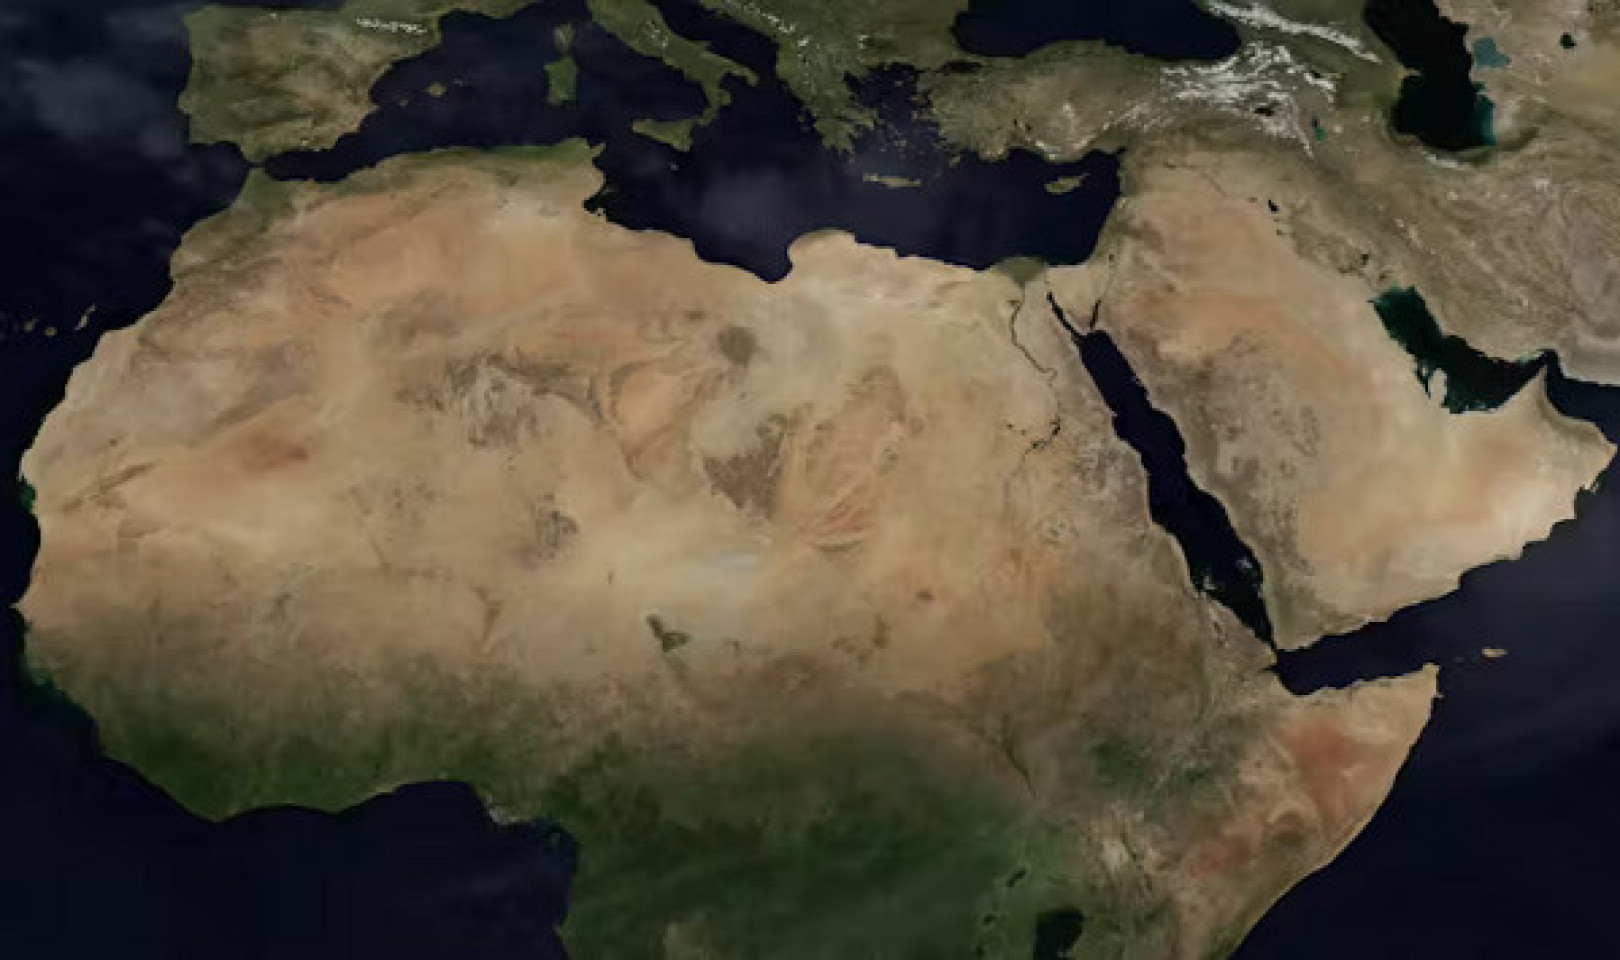 Africa's Climate Tipping Point: Sahara's Drying and Future Impacts